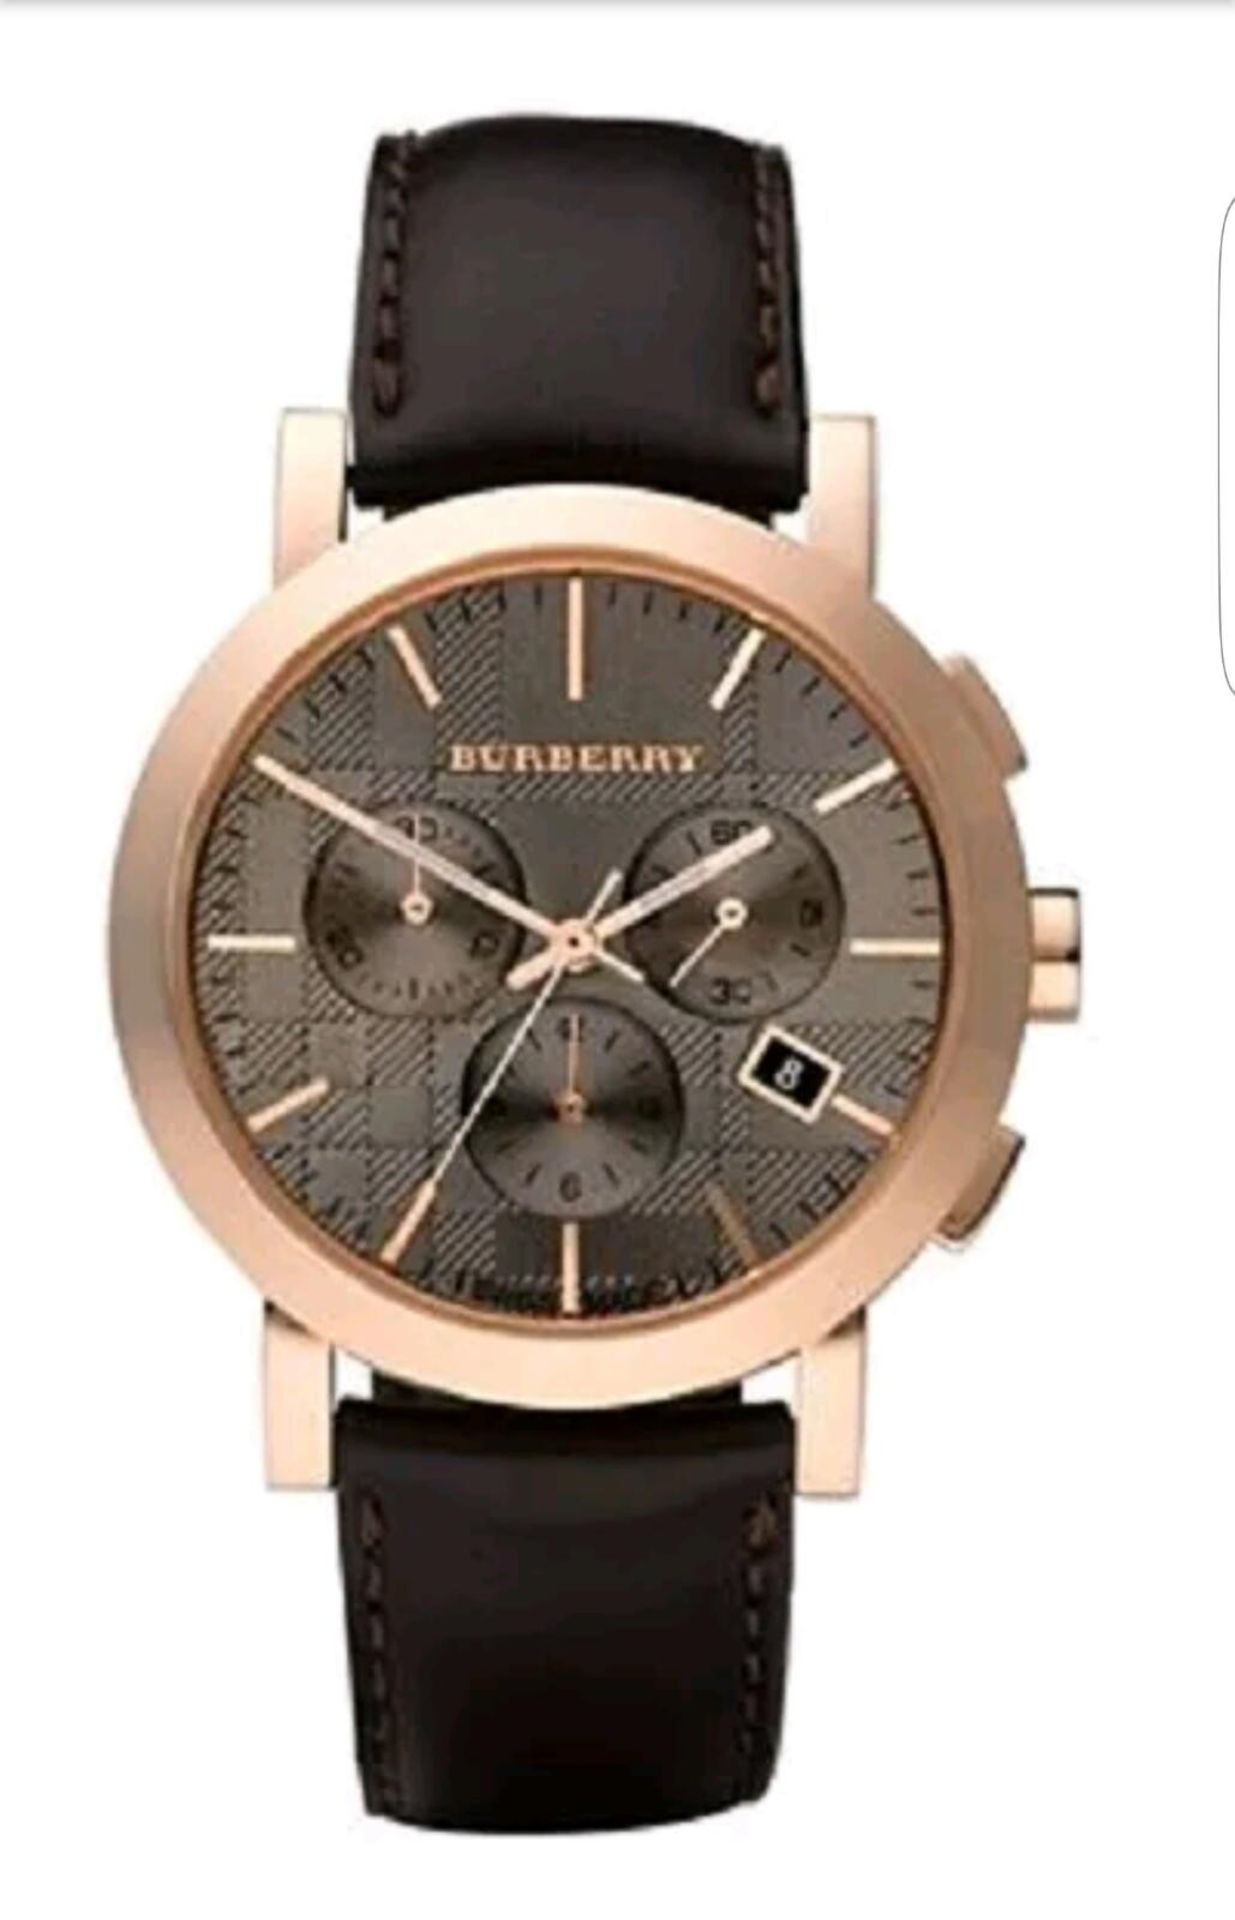 BRAND NEW GENTS BURBERRY WATCH, BU1863, COMPLETE WITH ORIGINAL BOX AND MANUAL - RRP £399